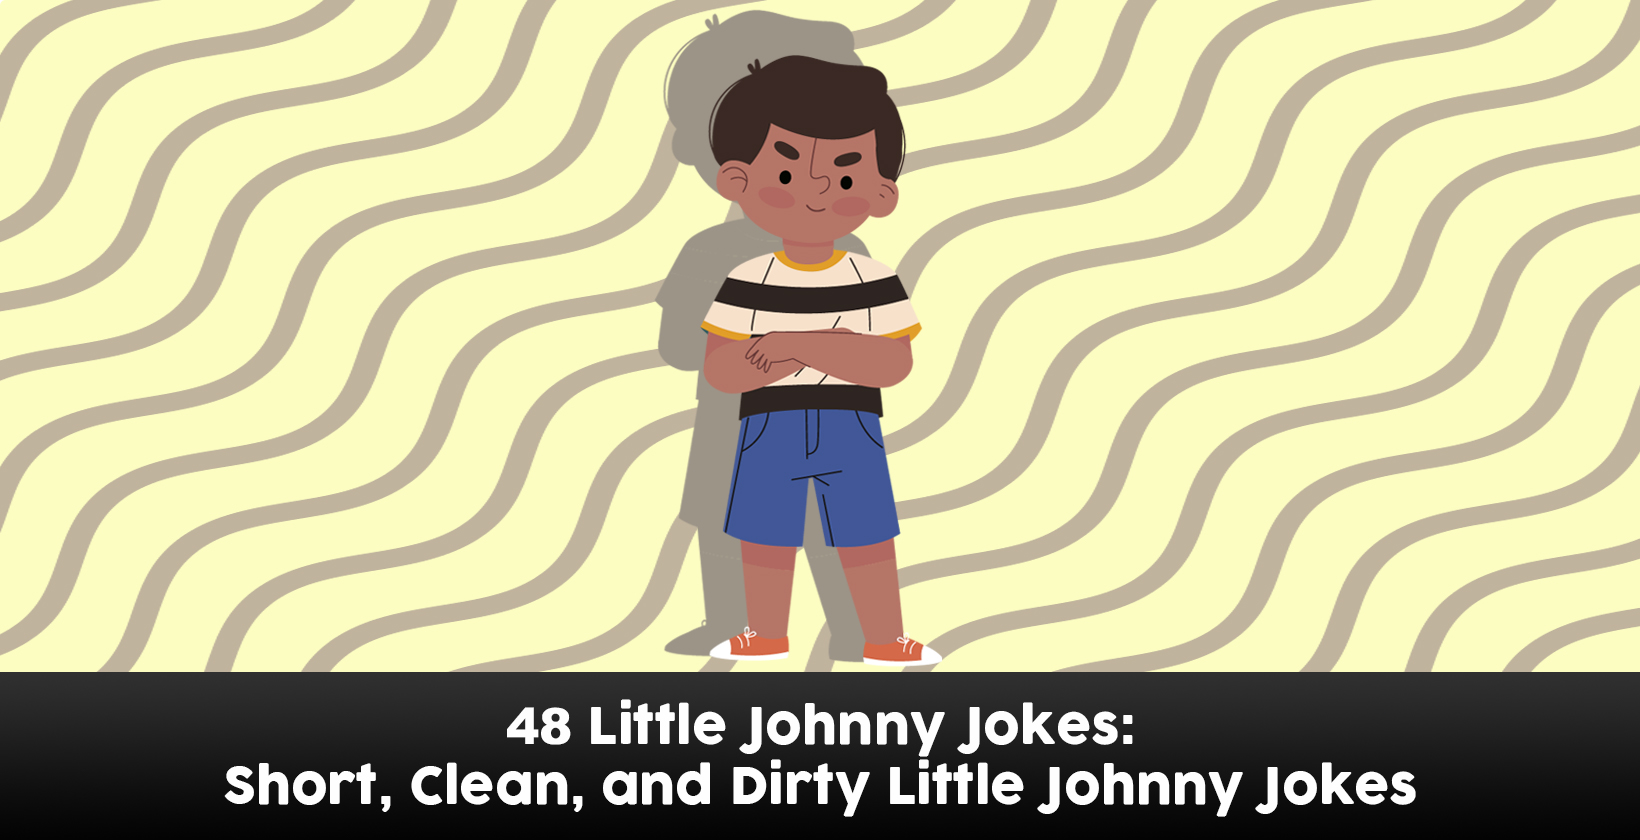 Funny and dirty Little Johnny jokes